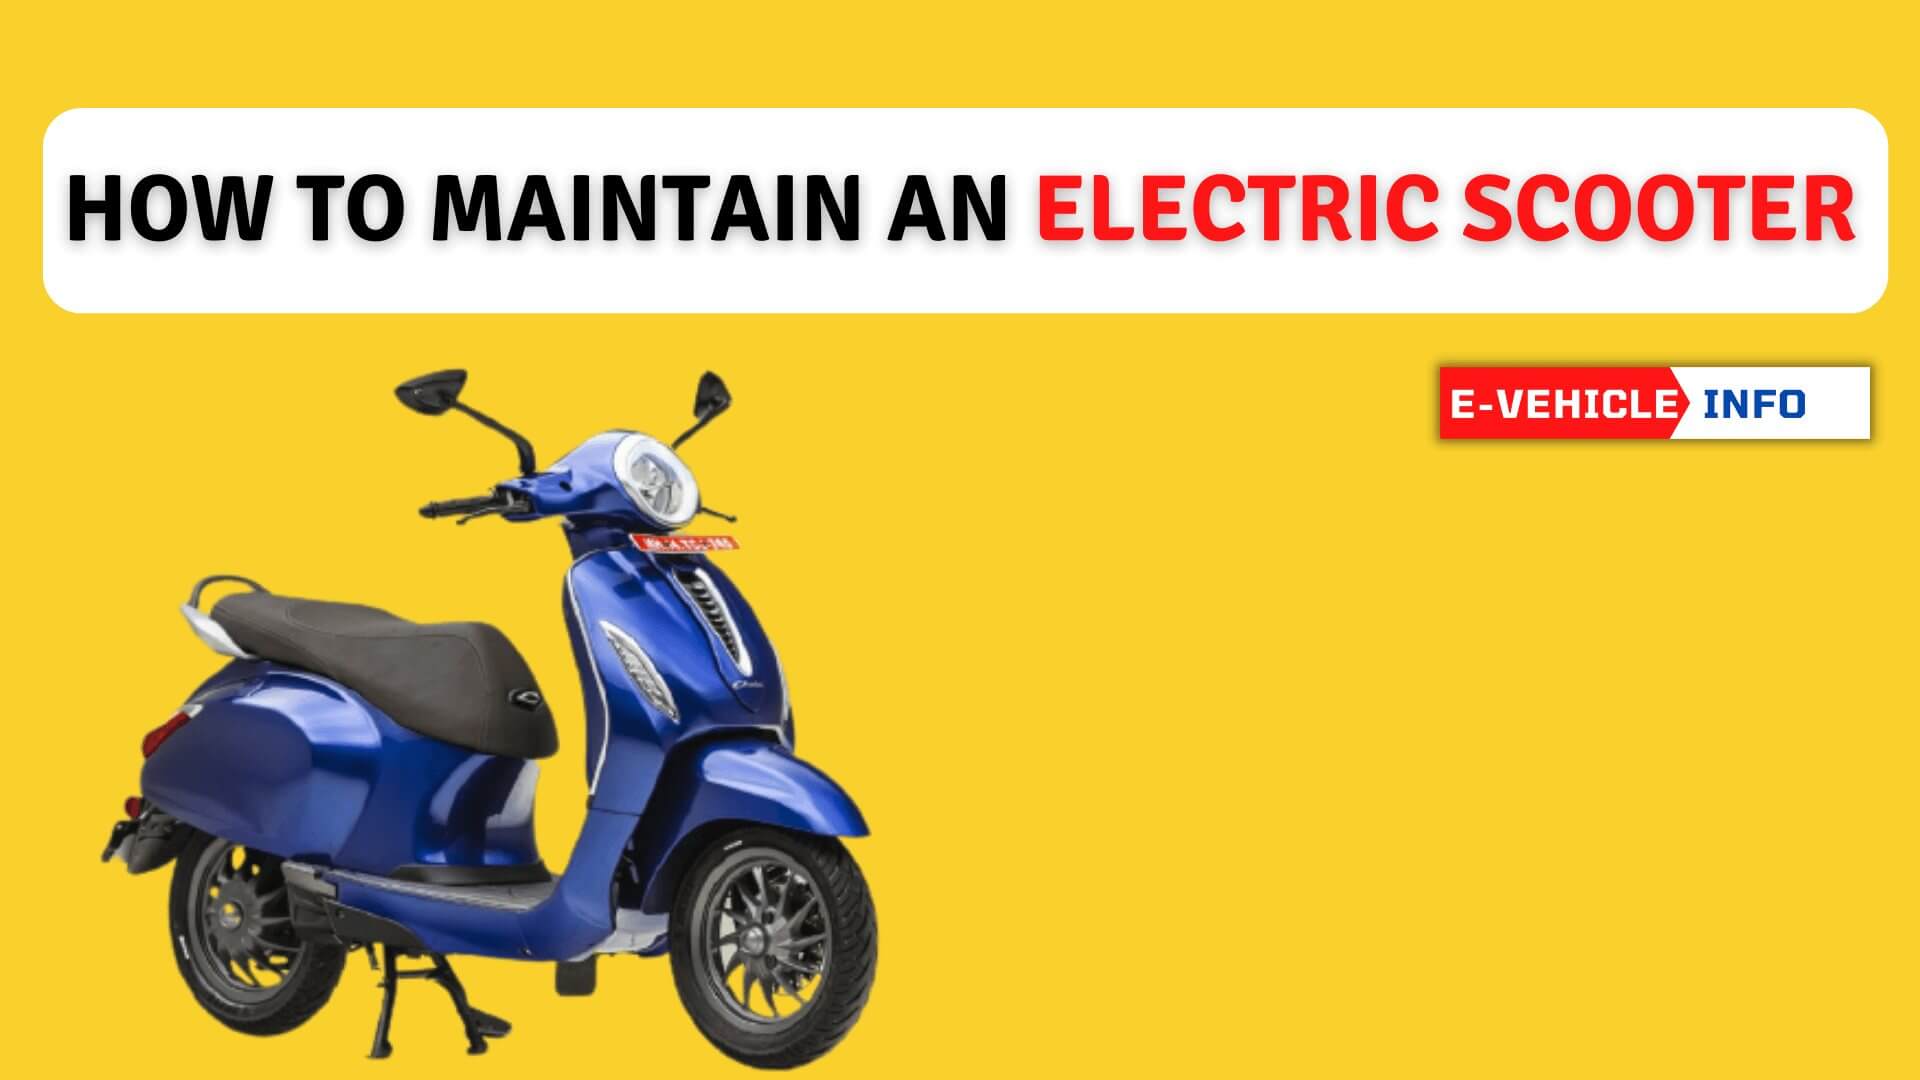 Care of Electric Scooters: Important Tips for Better Performance and Longer Range